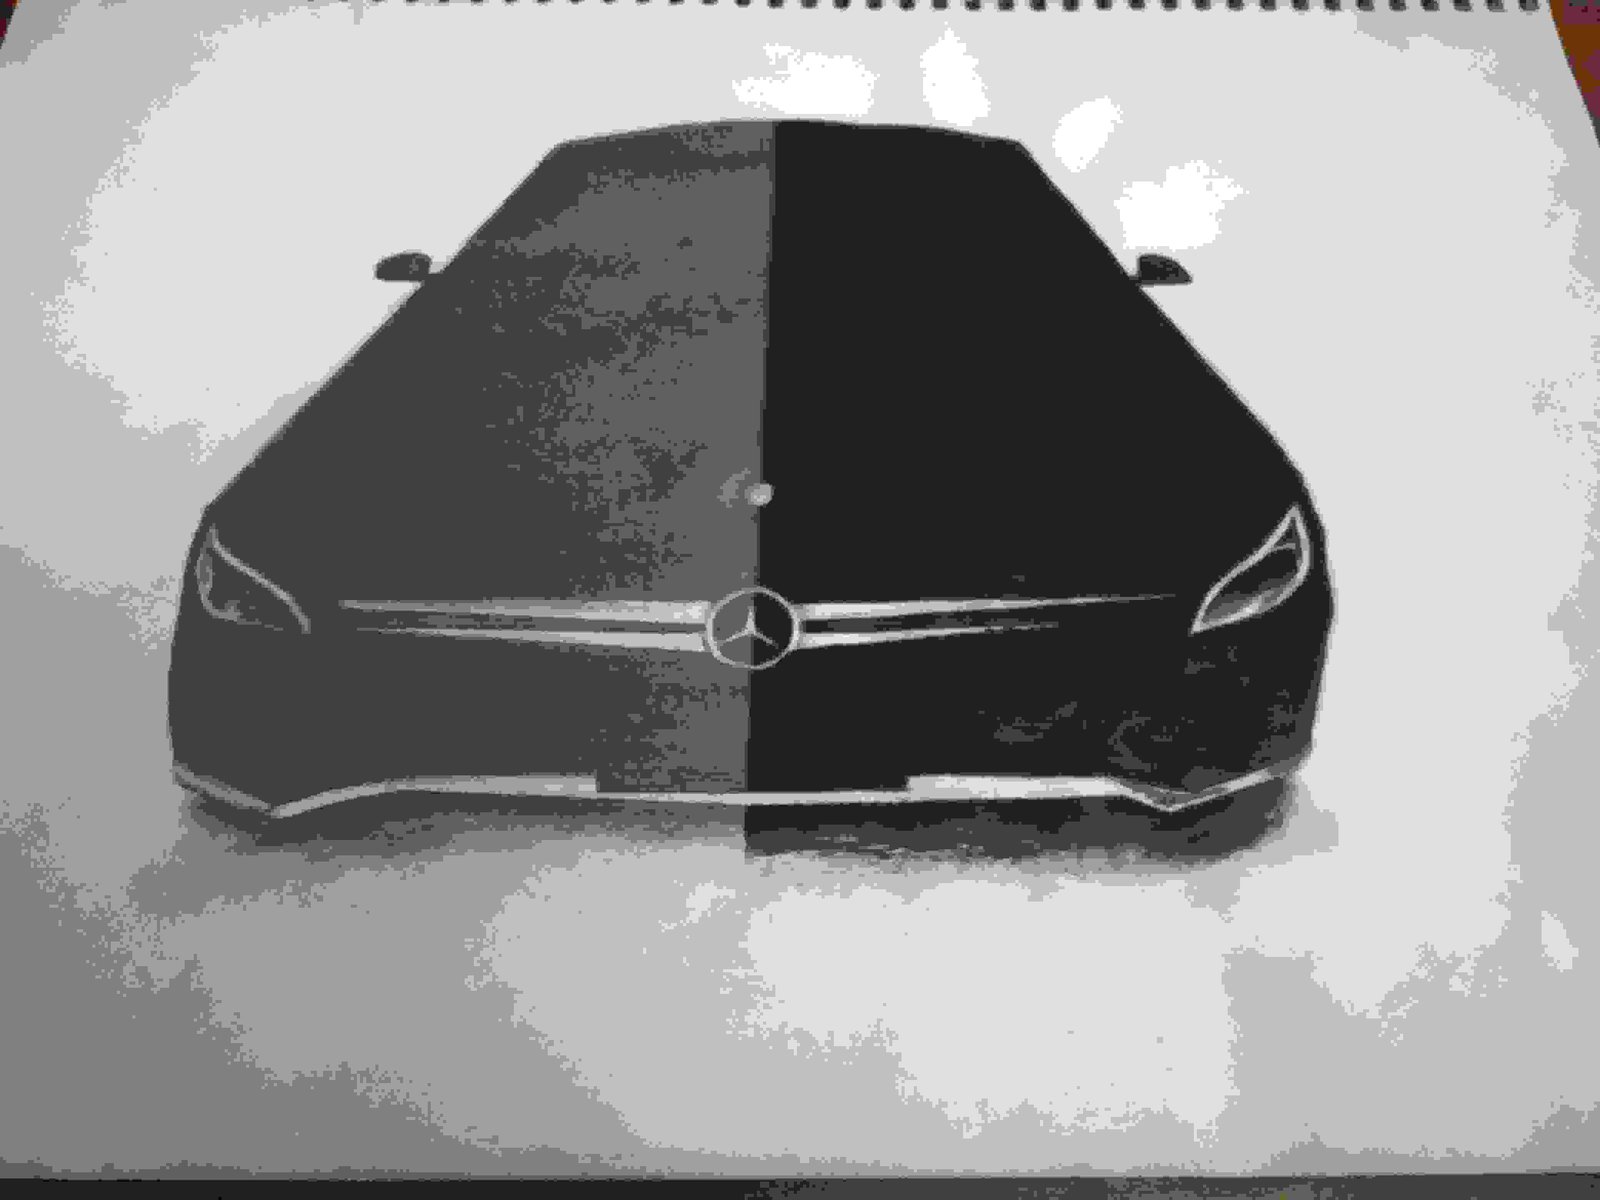 This Is A Drawing Of Mercedes Benz Car And Its Being Made